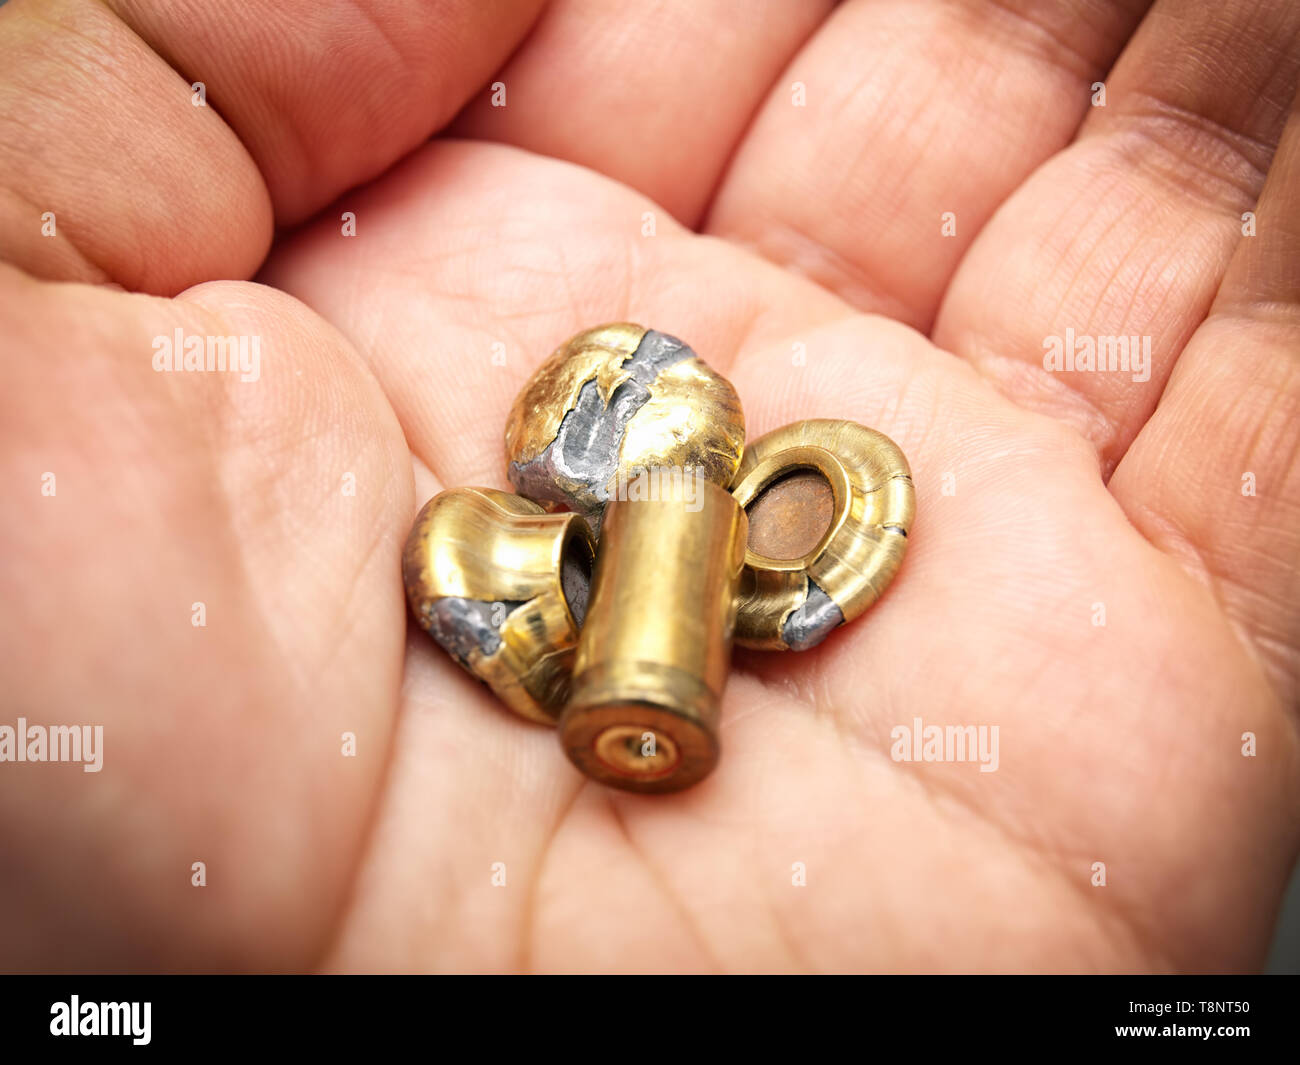 A hand holding a fired bullets and shell. Stock Photo